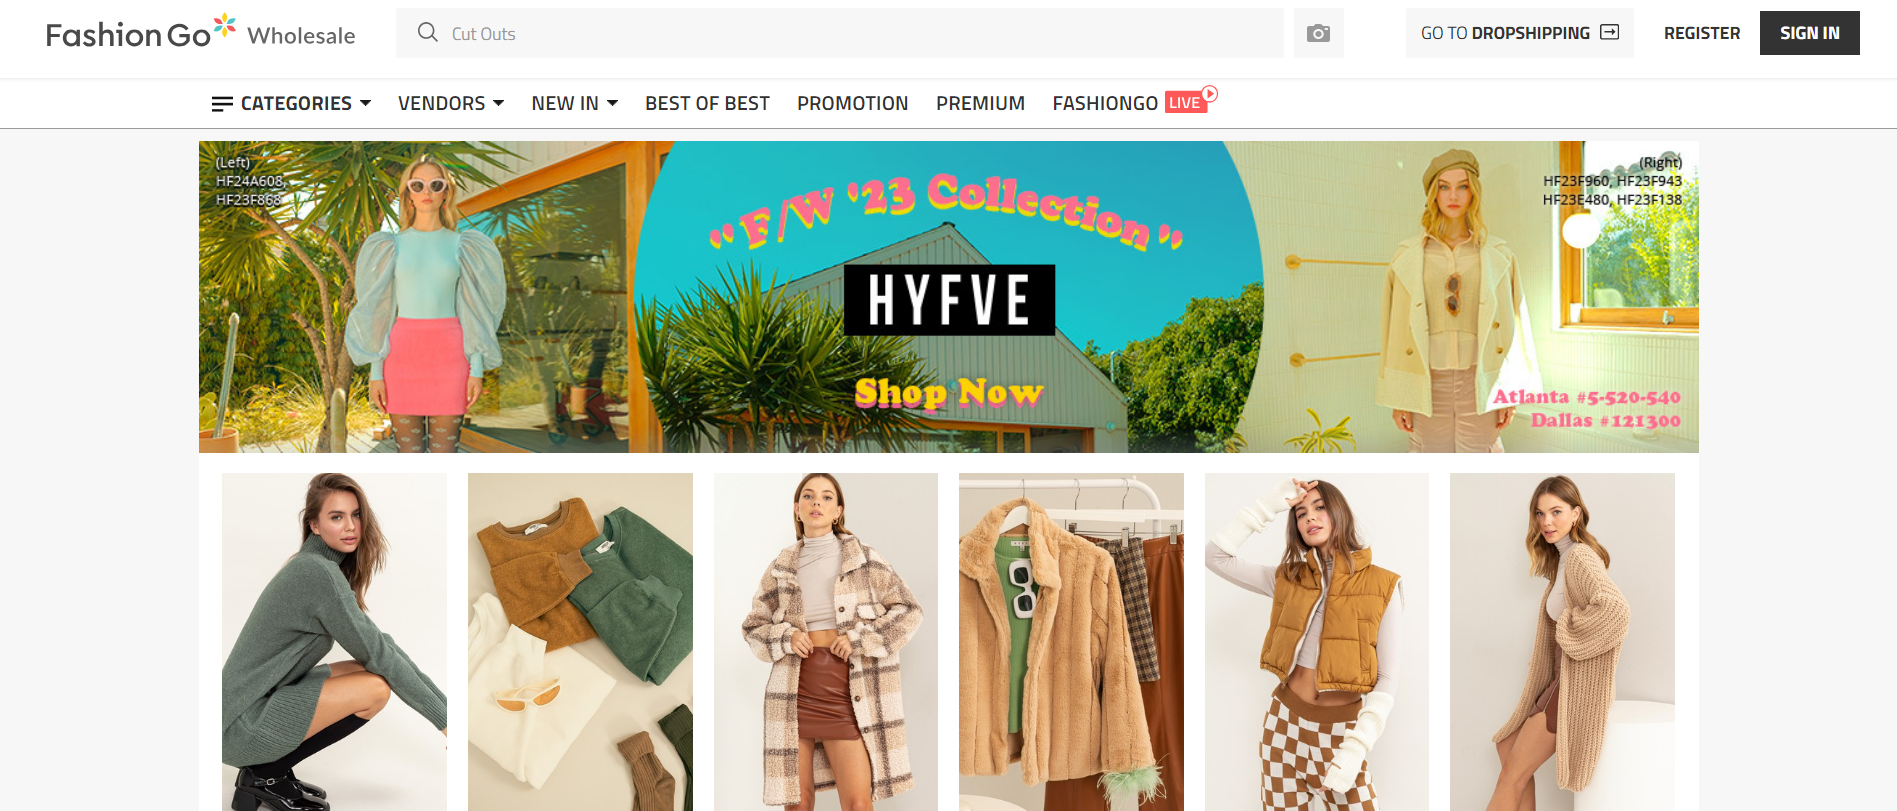 homepage of a wholesale clothing marketplace - Fashion Go